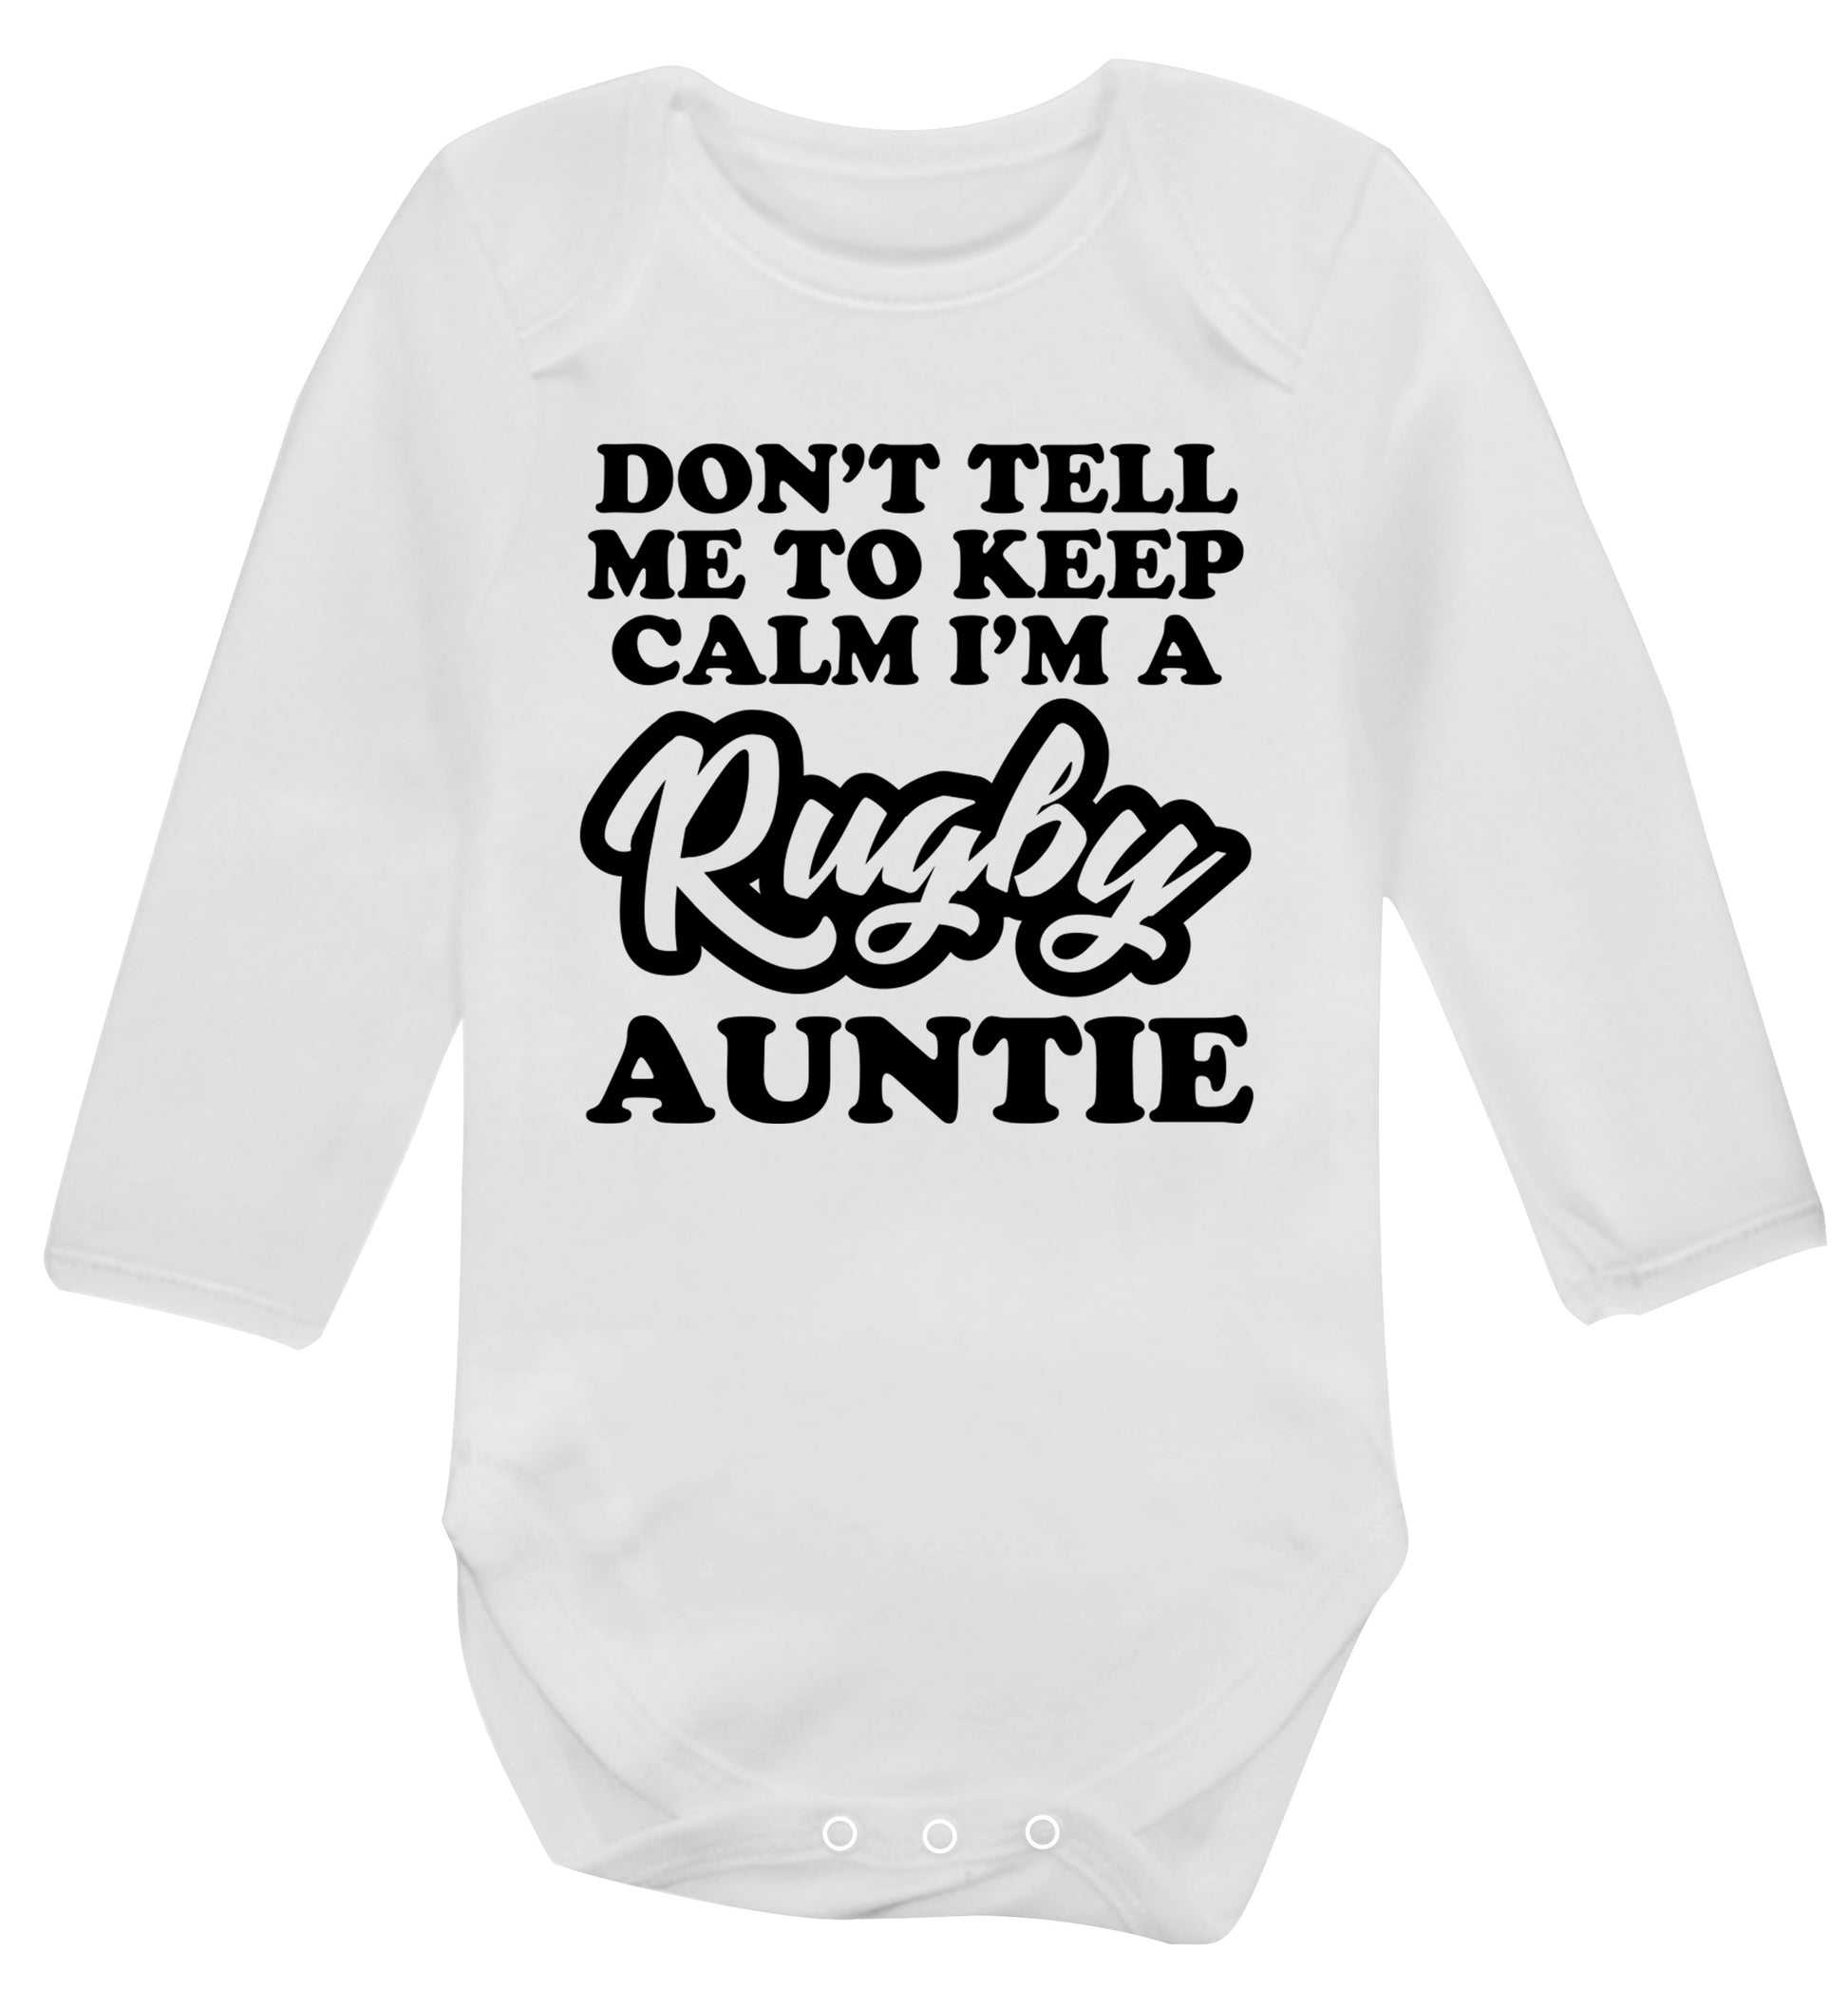 Don't tell me keep calm I'm a rugby auntie Baby Vest long sleeved white 6-12 months